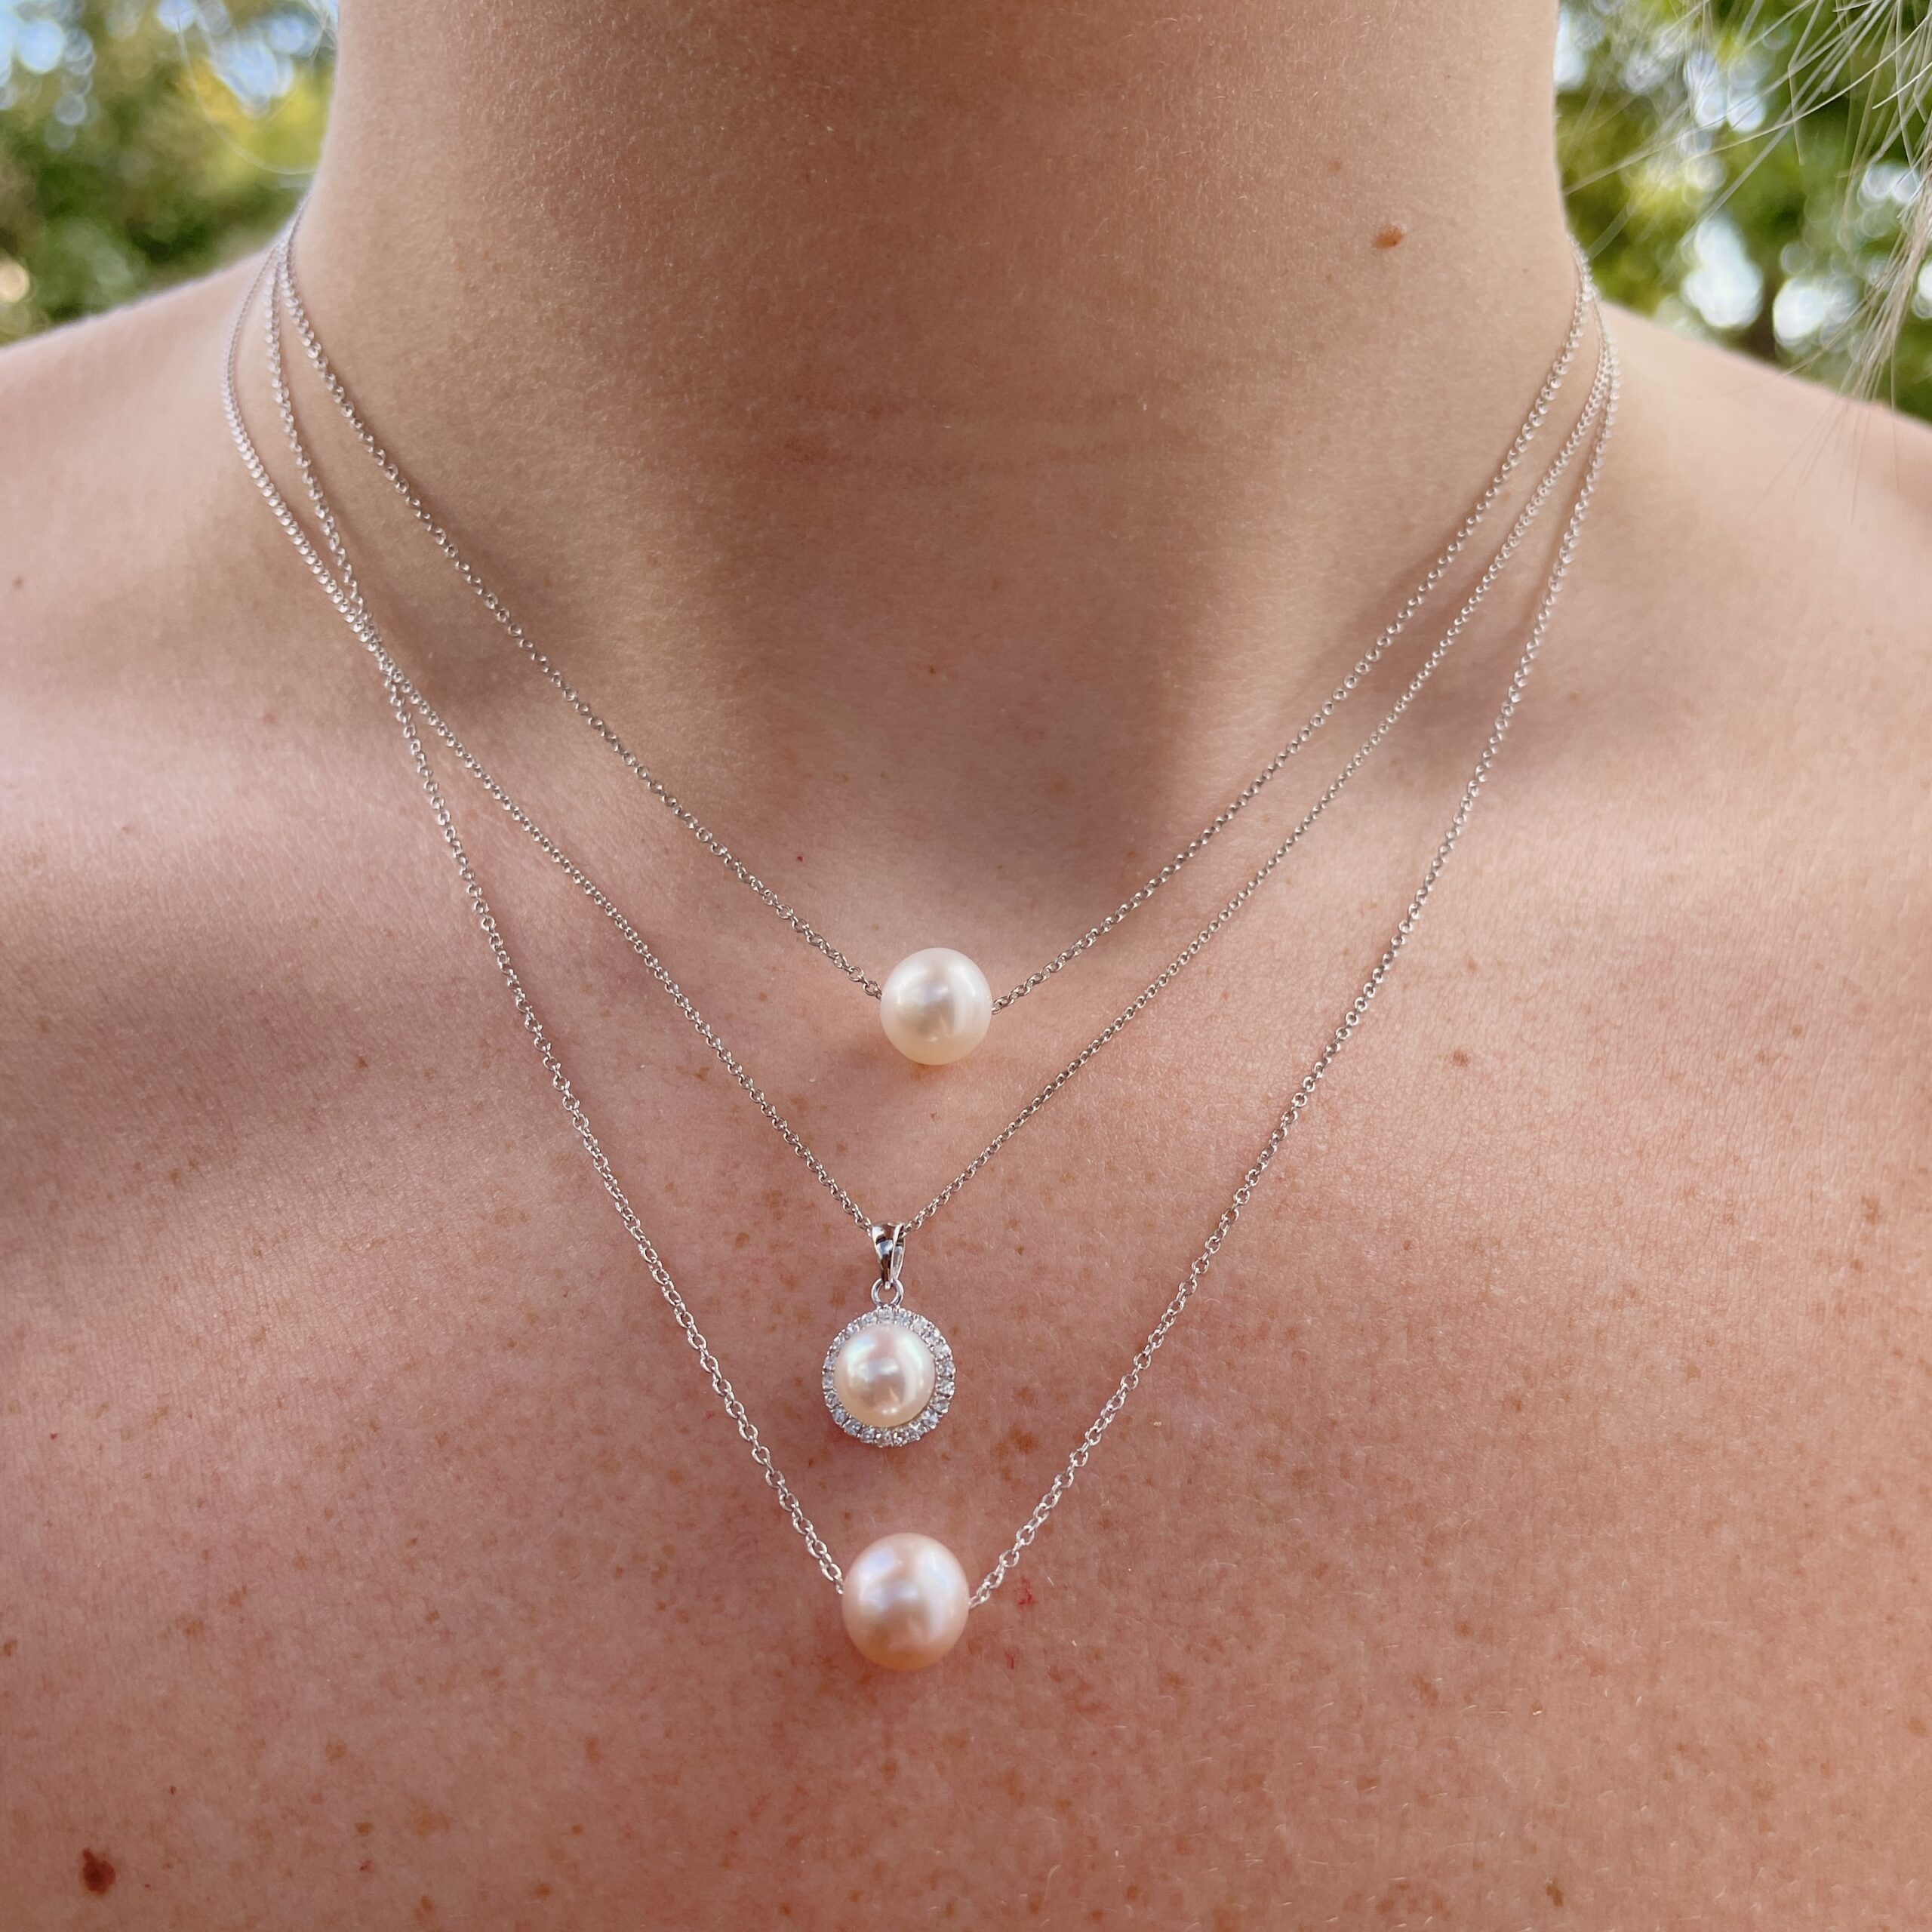 White Gold Freshwater Pearl Floating Necklace